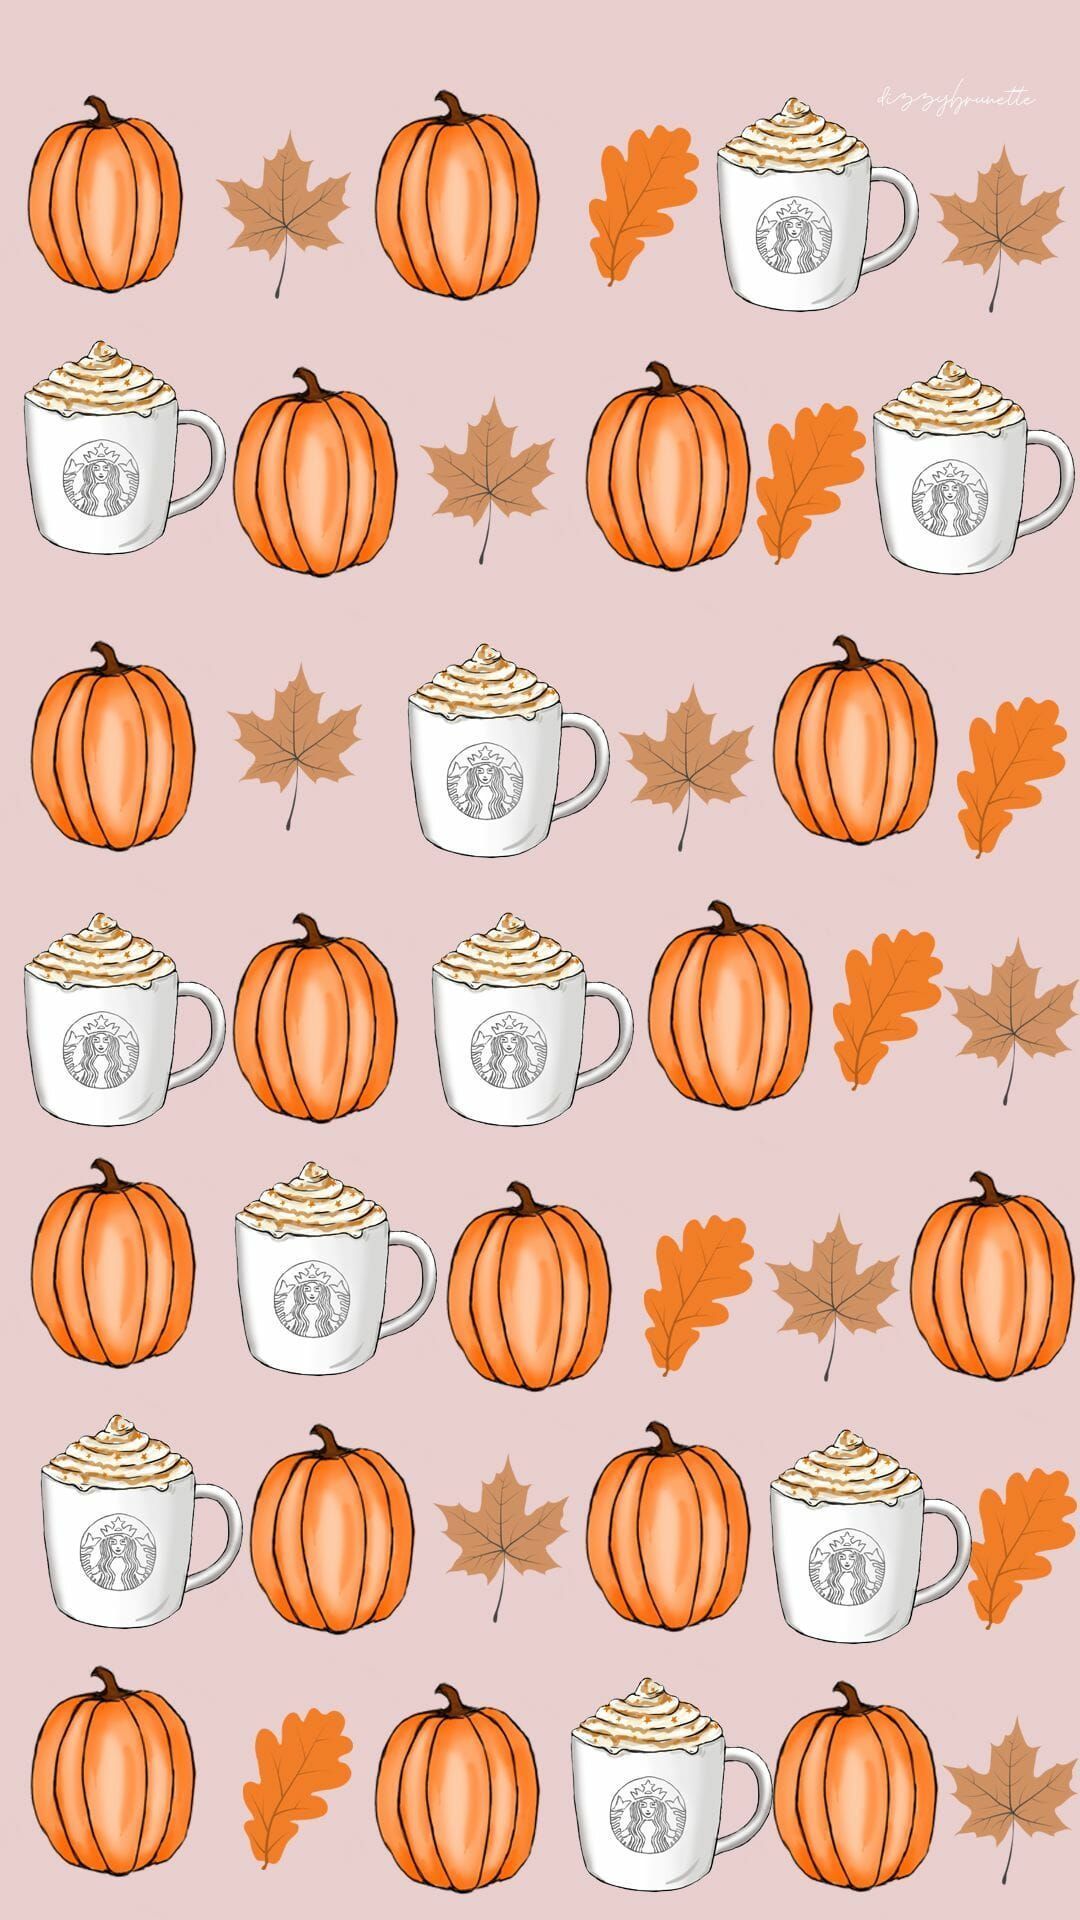 1080x1920 Pumpkin spice wallpaper for your phone or desktop background! - Fall, fall iPhone, cute fall